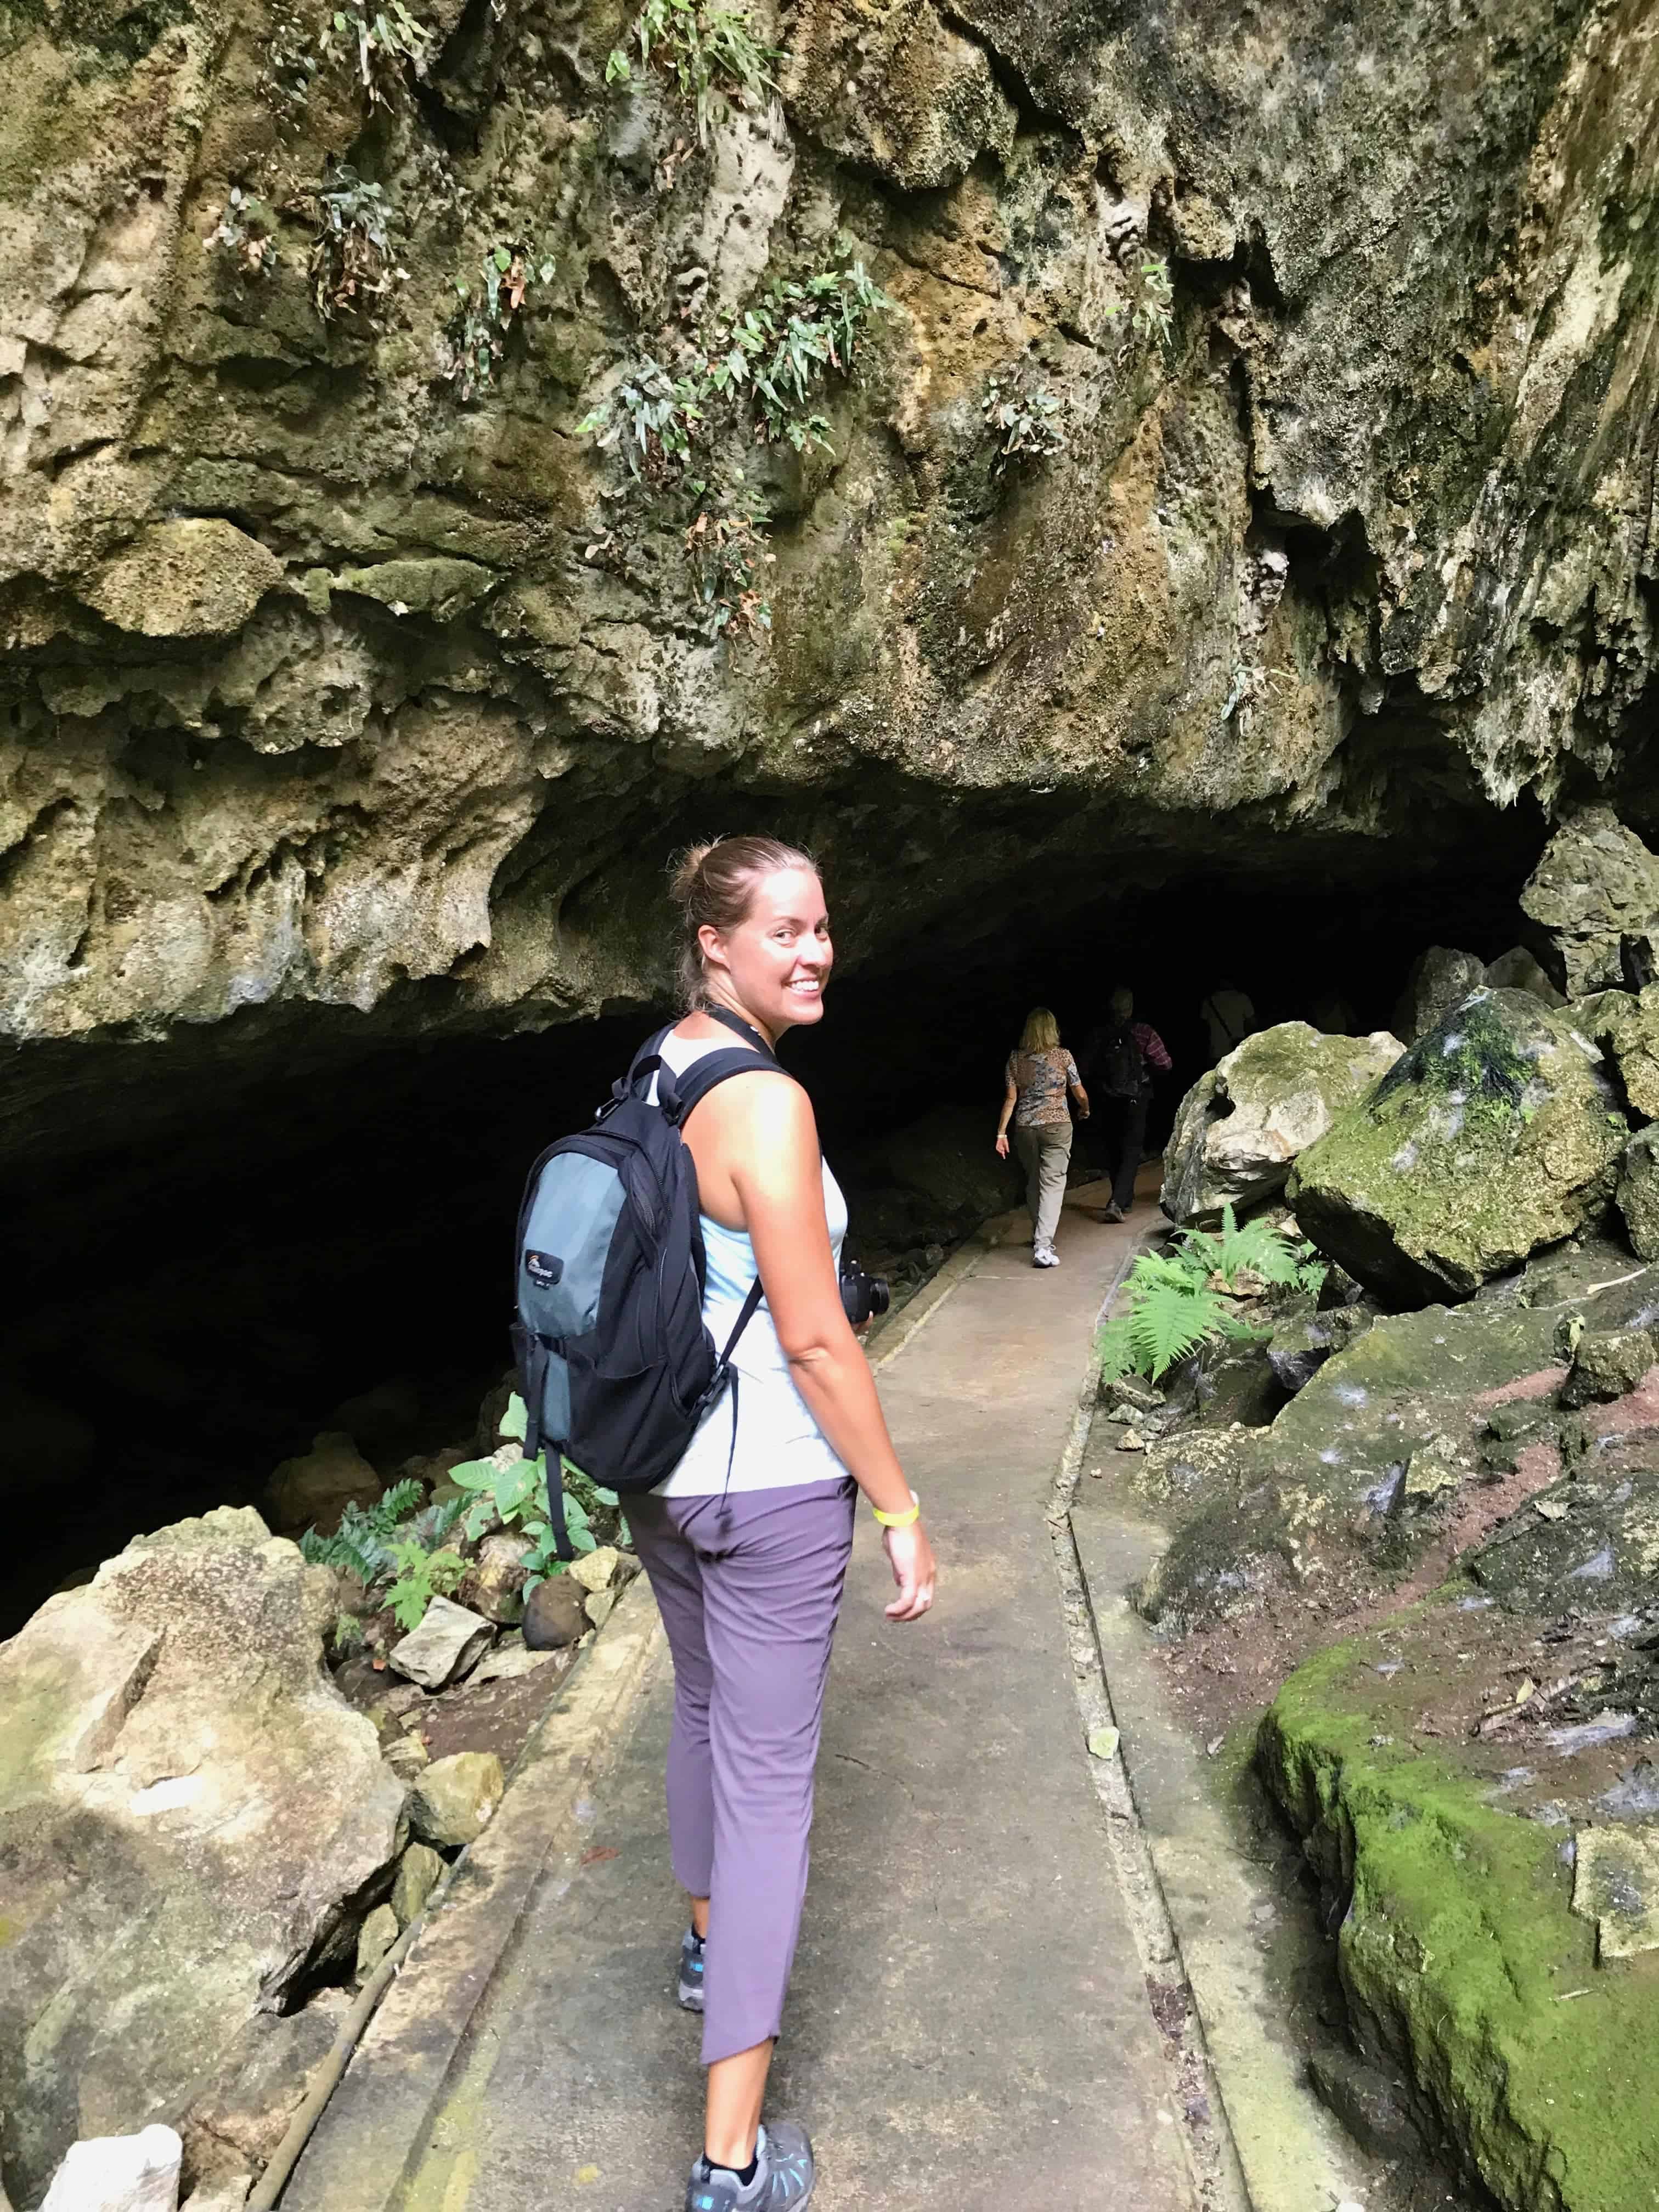 Joannda on the Deer and Lang Cave Tour